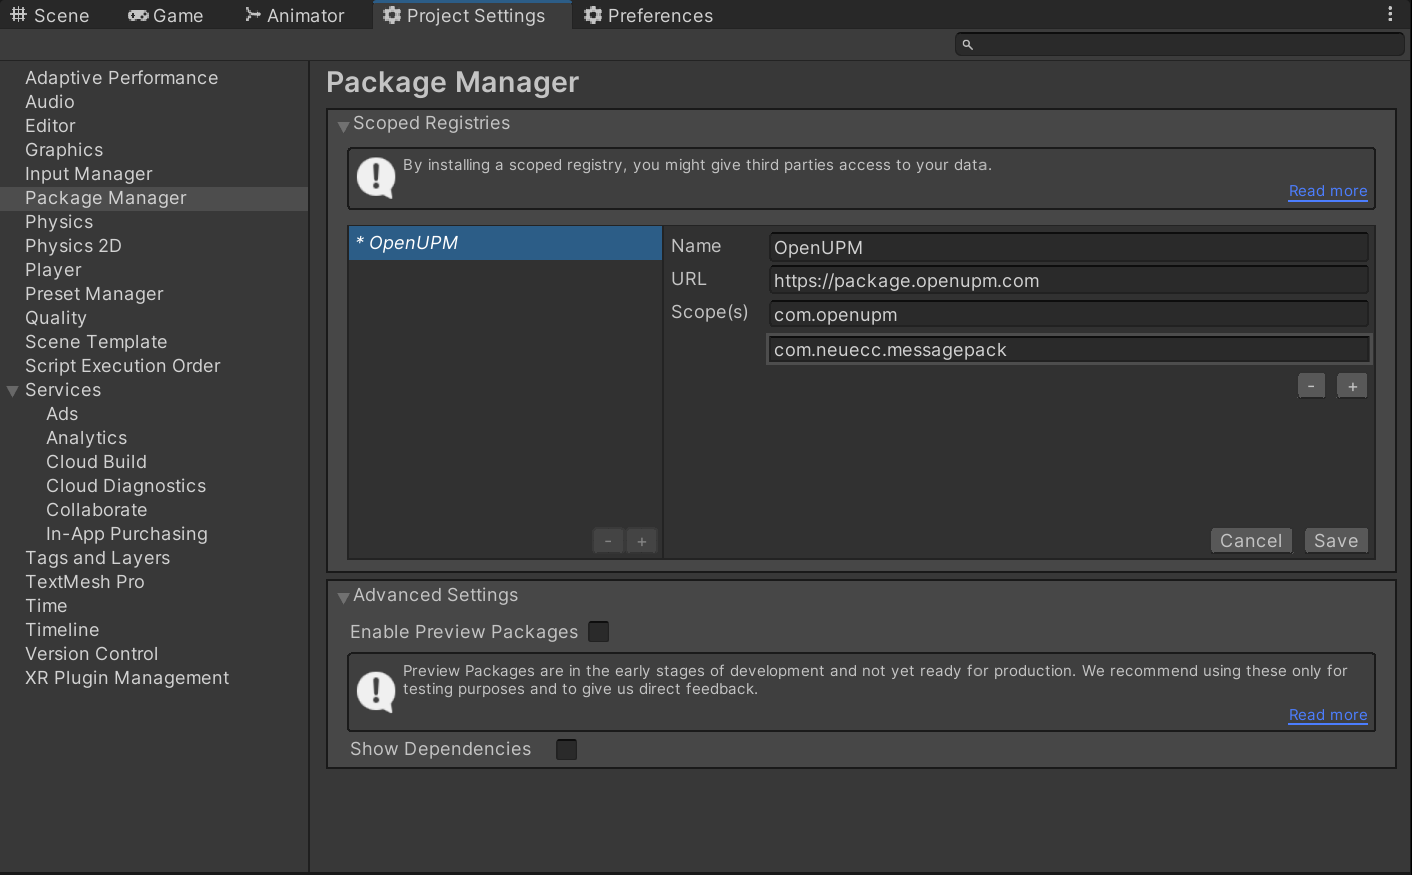 Package Manager settings